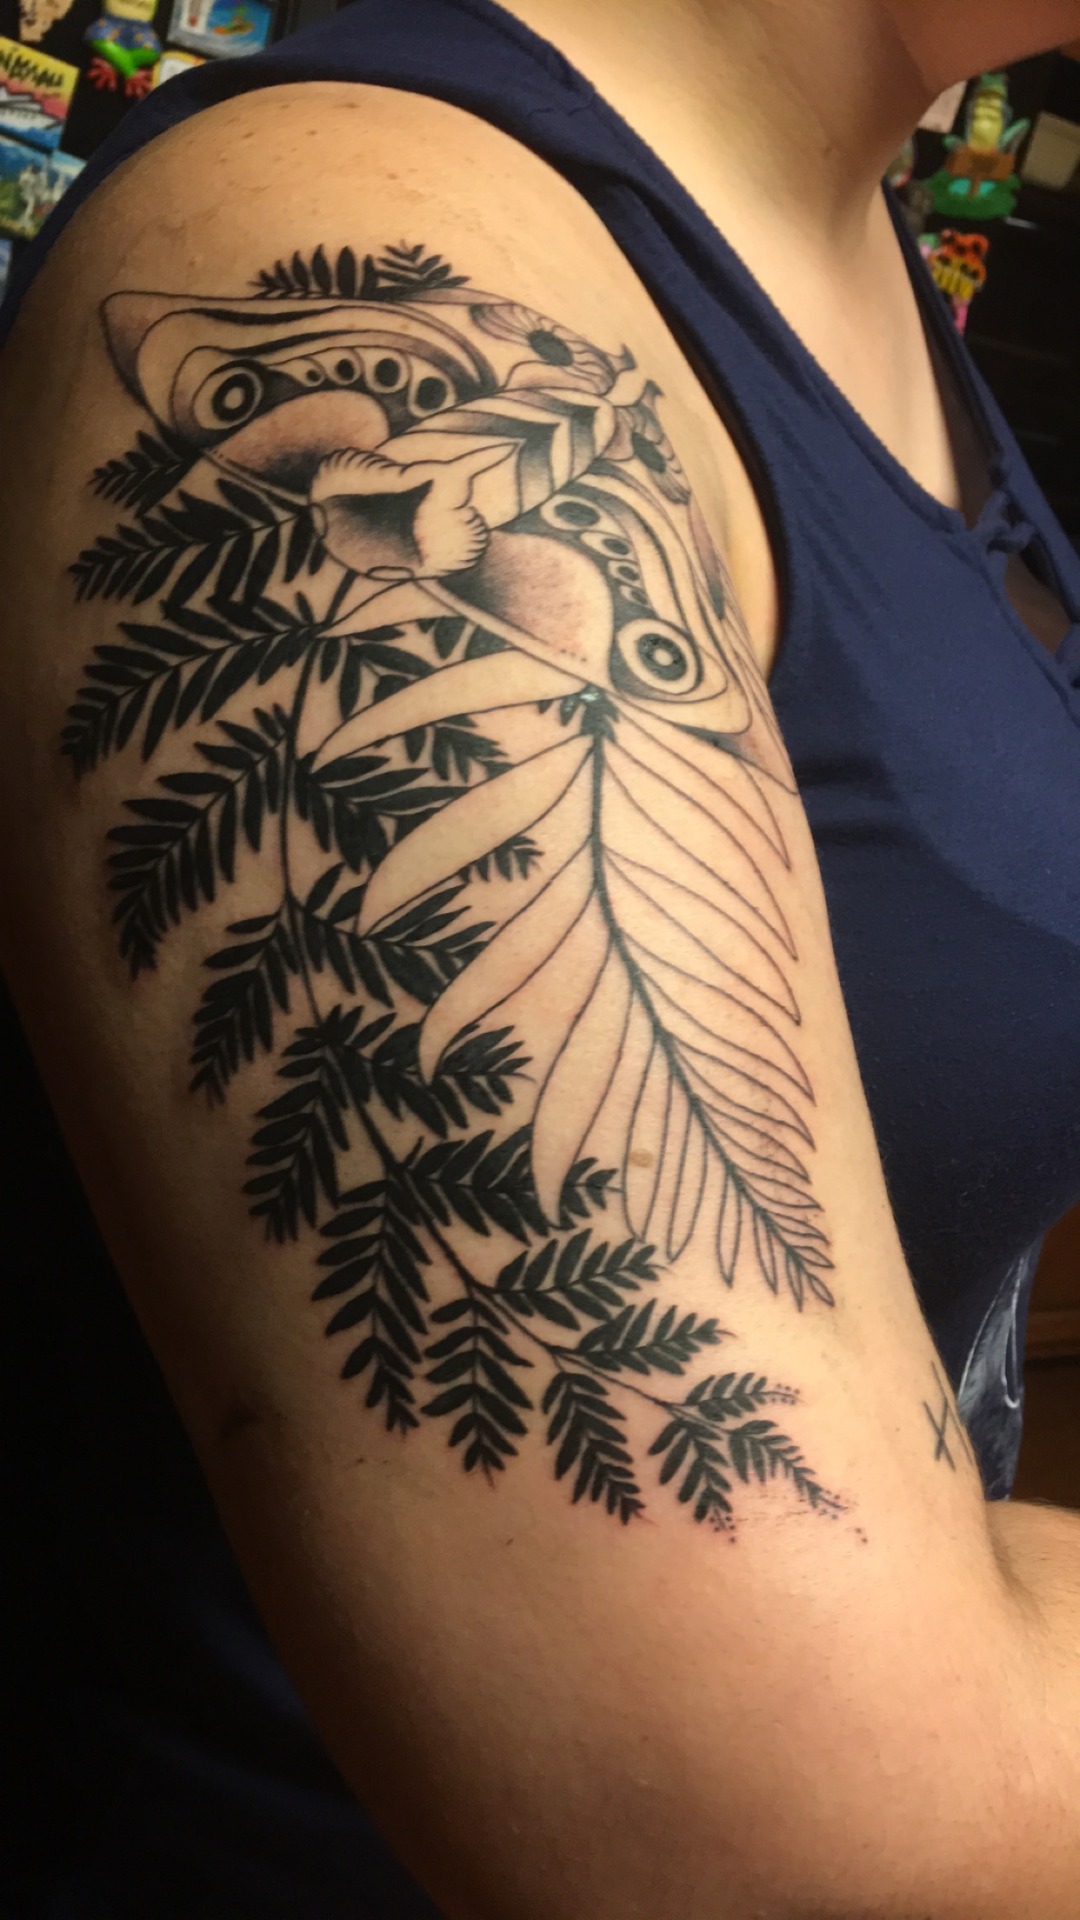 Naughty Dog — My Ellie tattoo from The Last of Us Part 2!